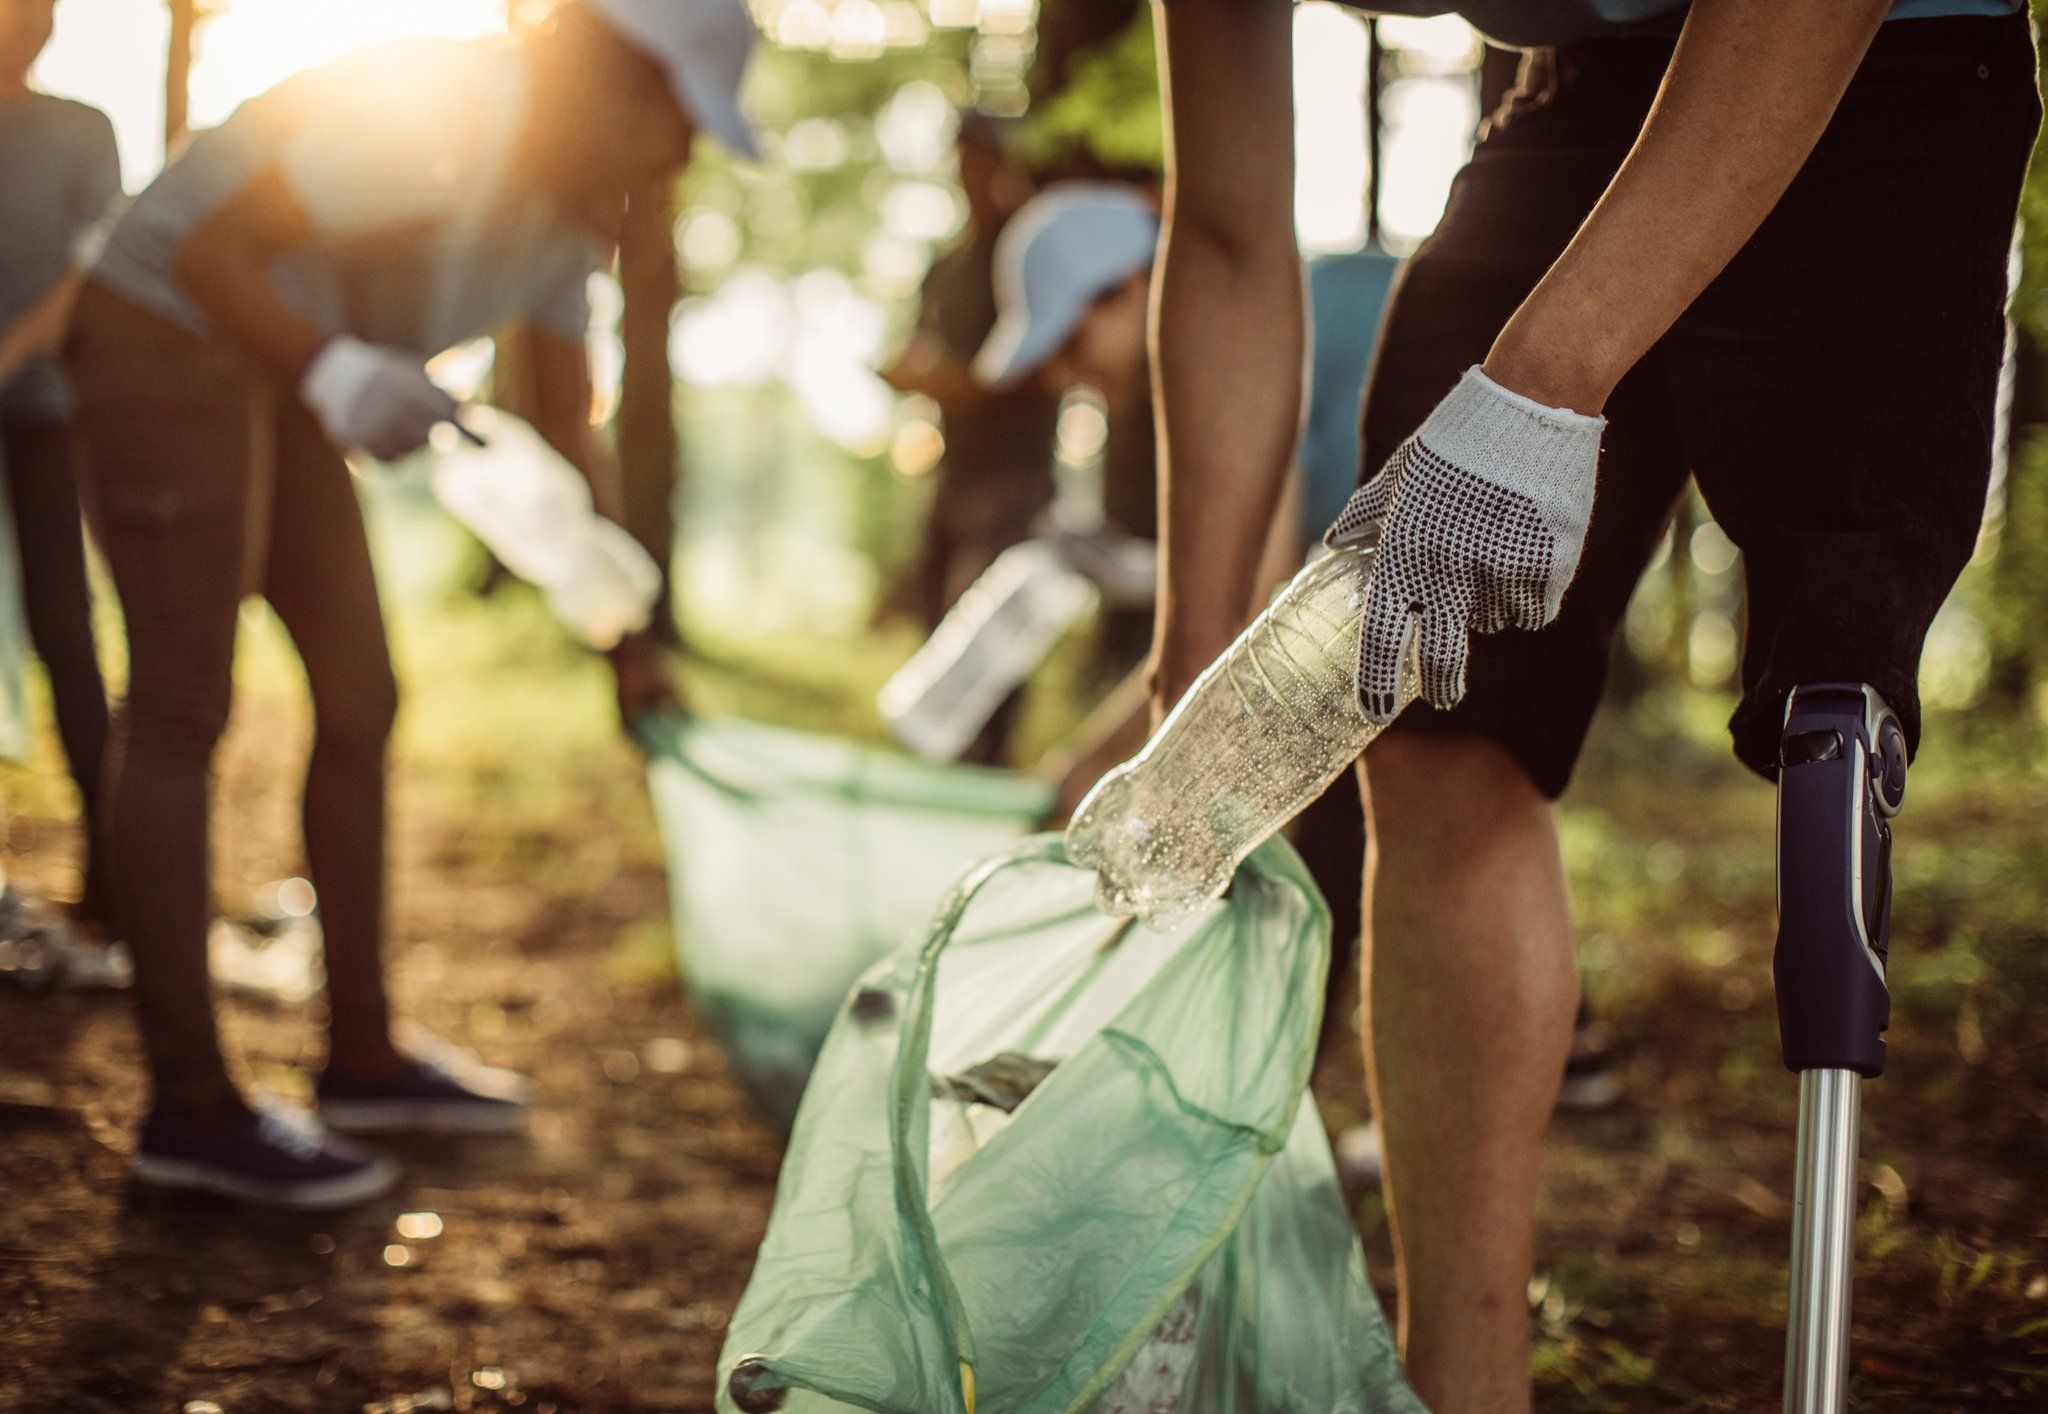 60 independent UK festivals have already committed to getting rid of single-use plastic at their events by 2021